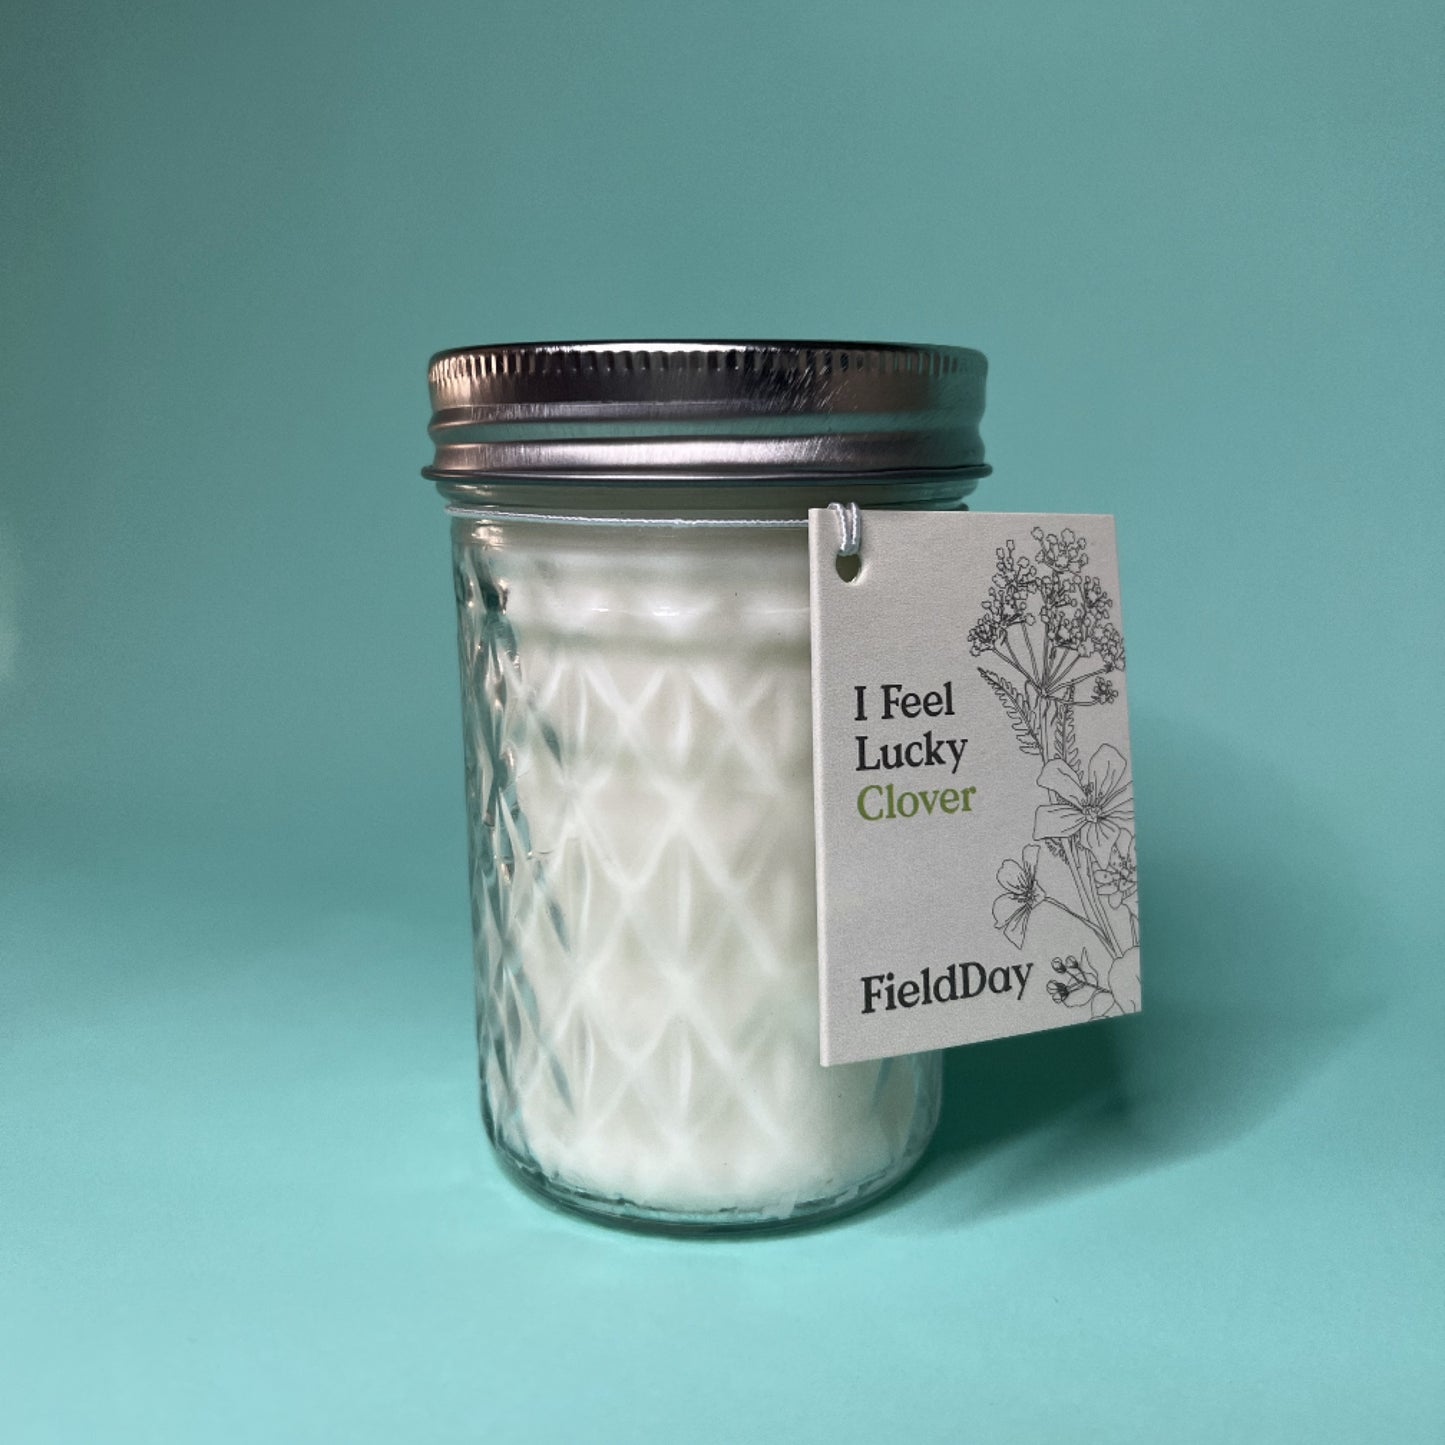 Clover Jam Jar Candle by Field Day